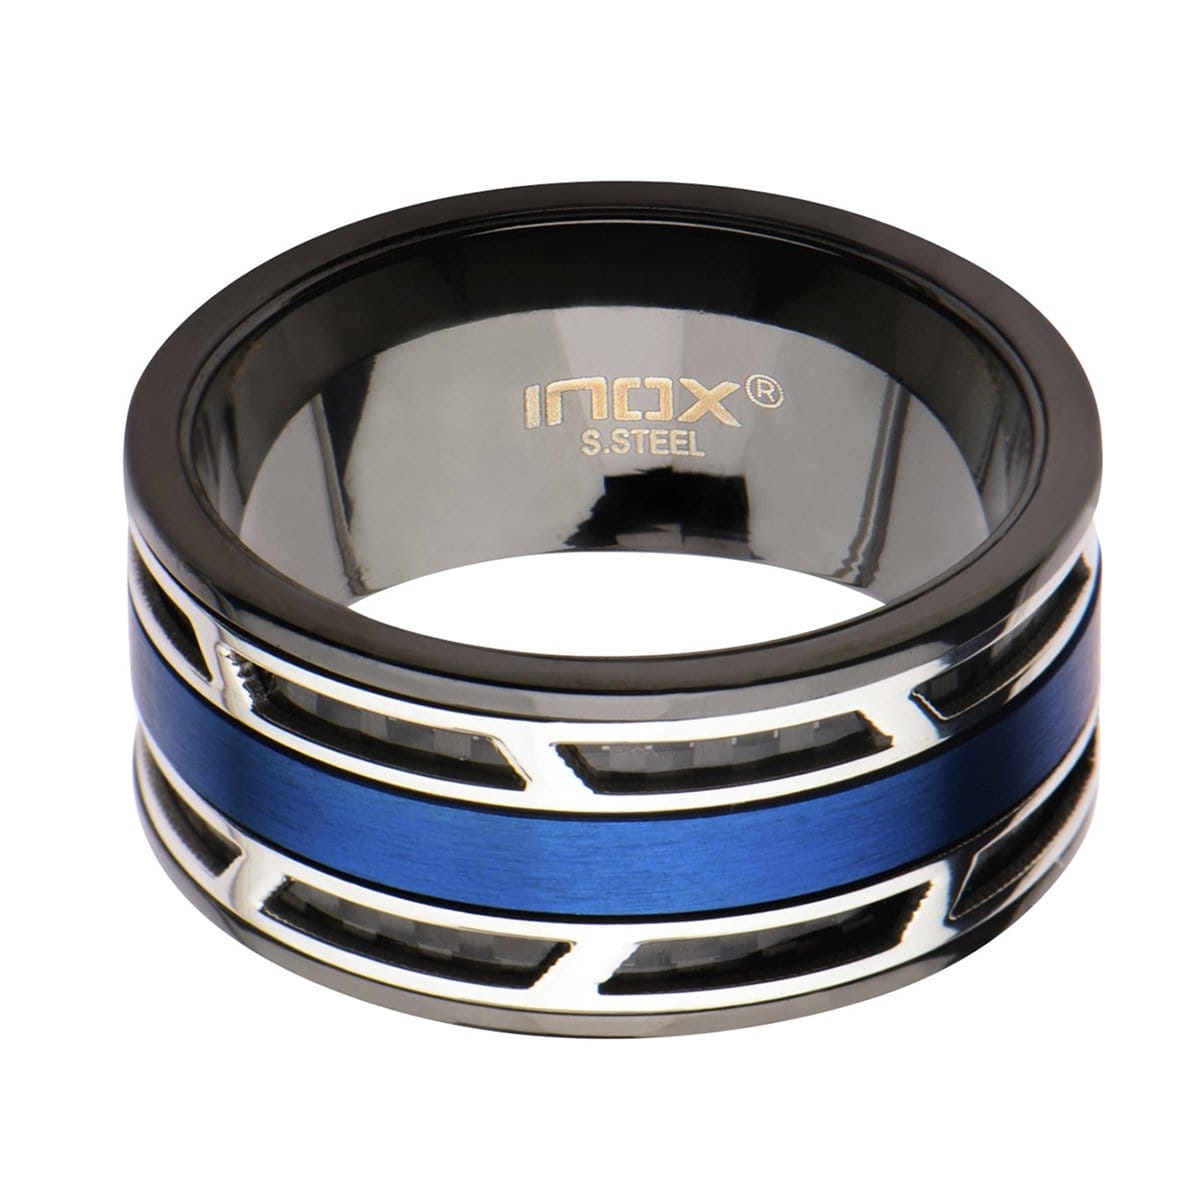 INOX JEWELRY Rings Silver Tone, Blue and Black Stainless Steel with Inlaid Carbon Fiber Ring